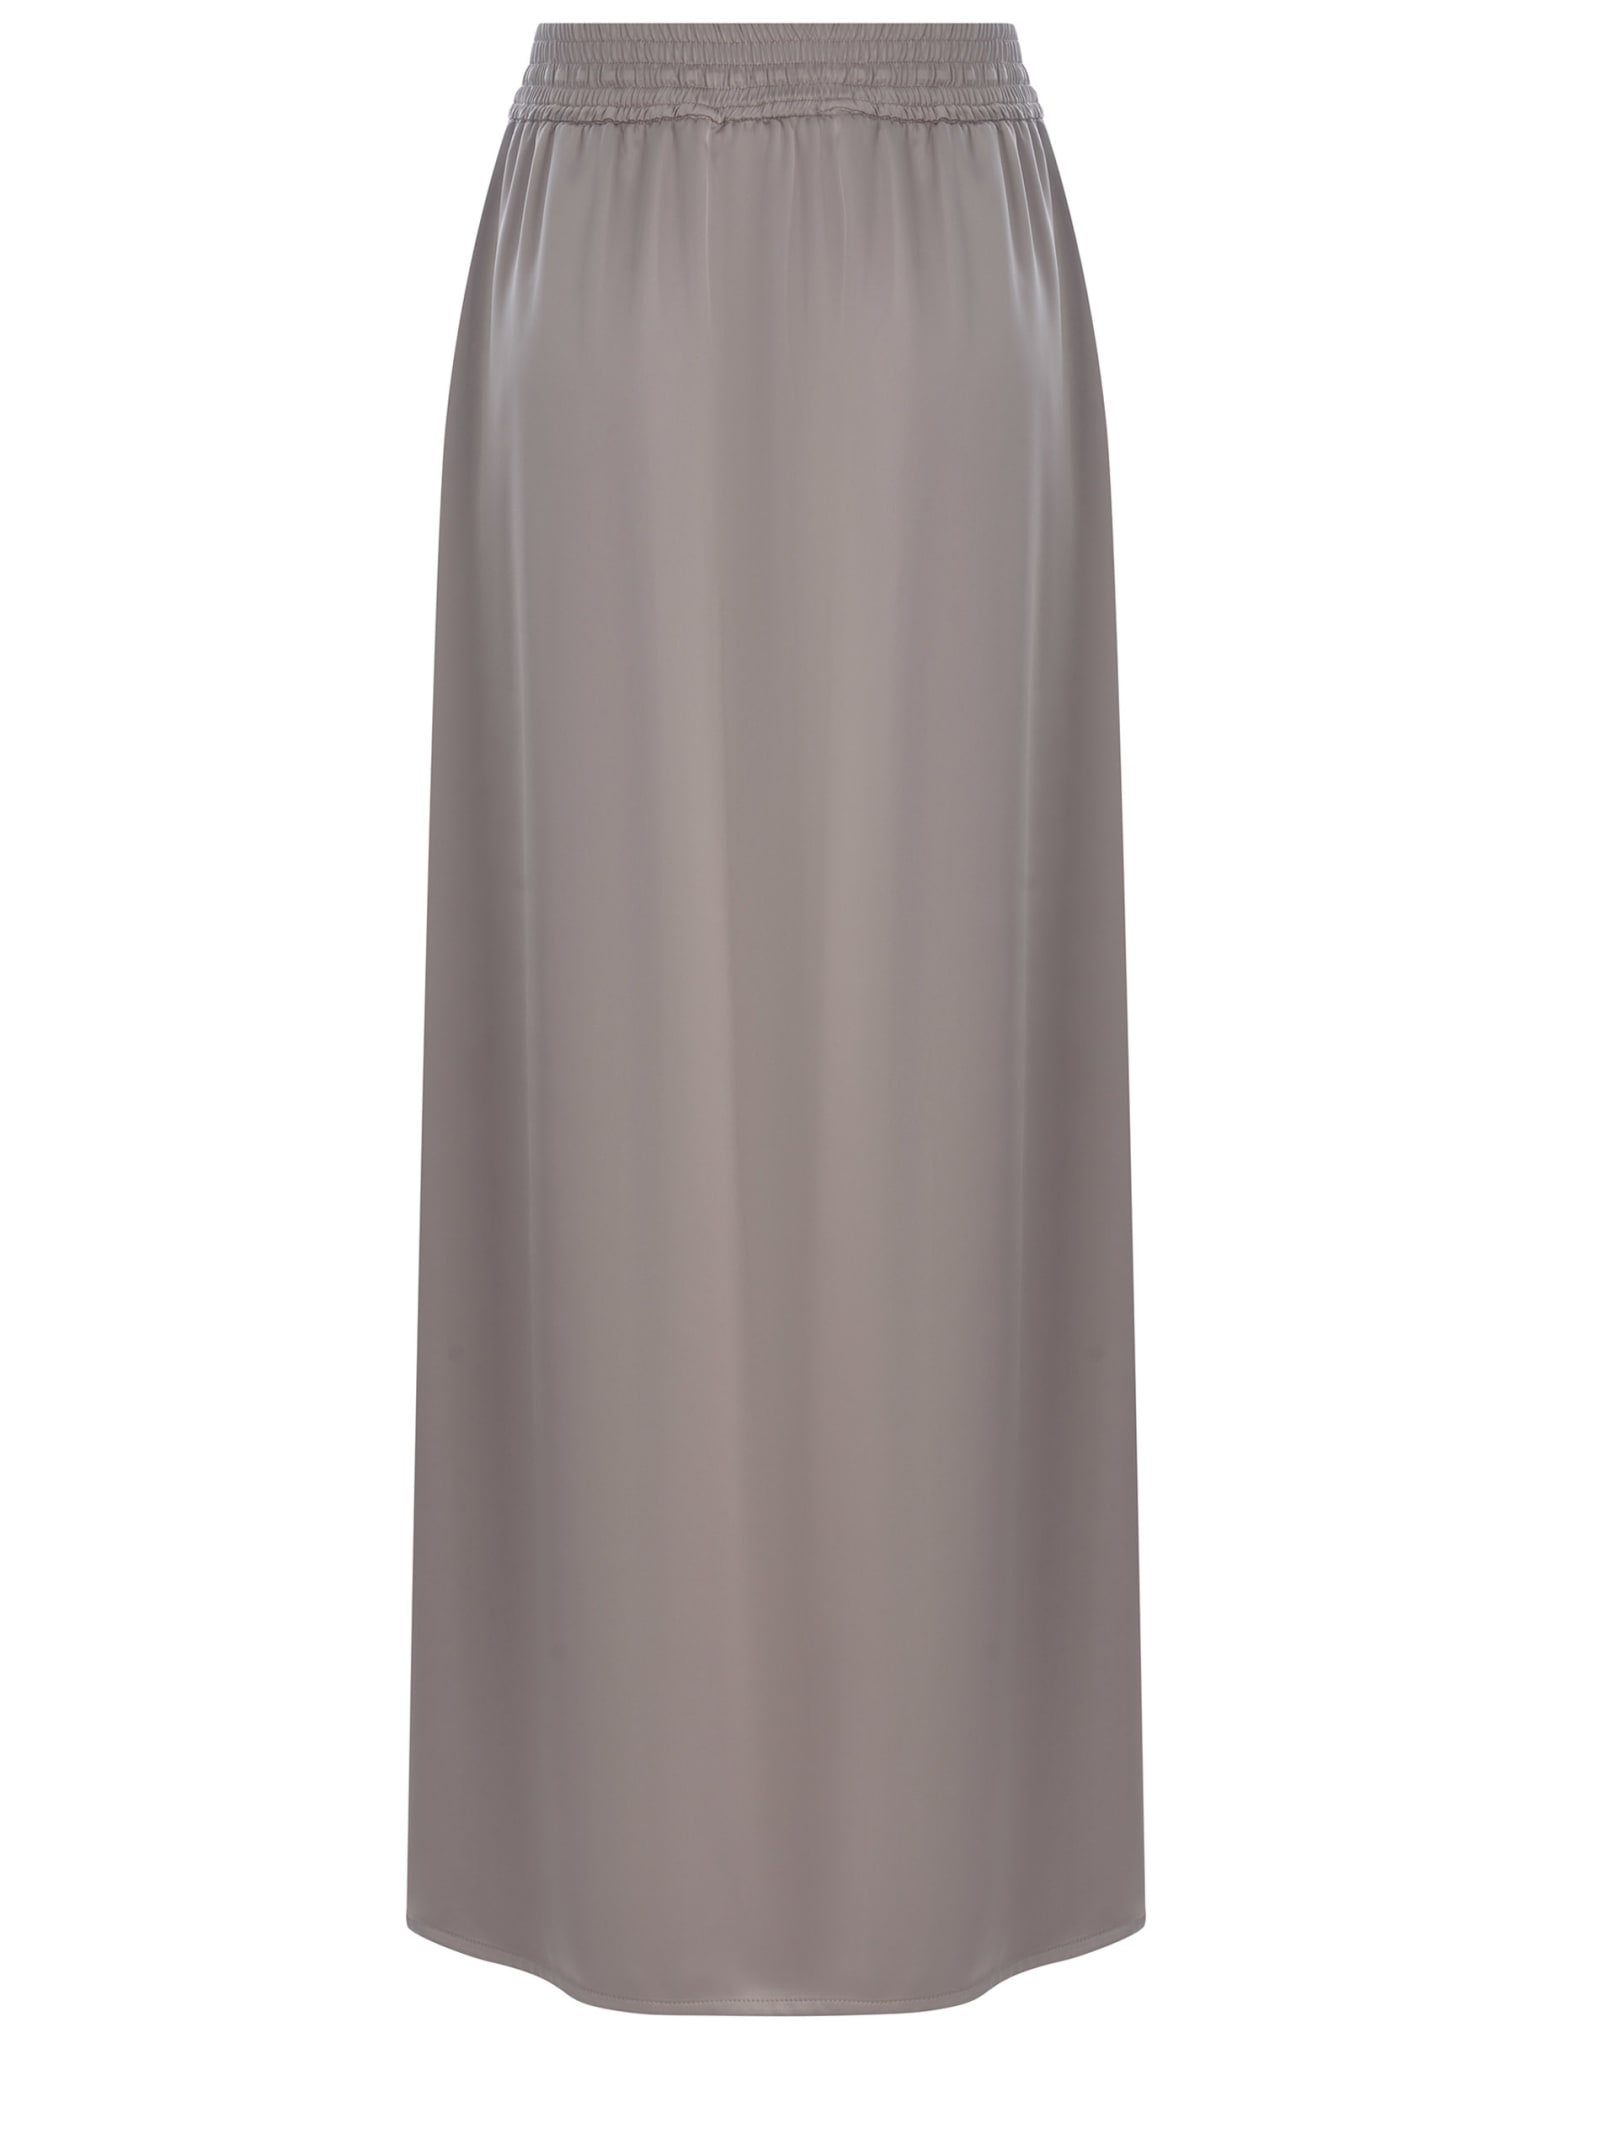 Shop Herno Skirt  Made Of Satin In Chantilly